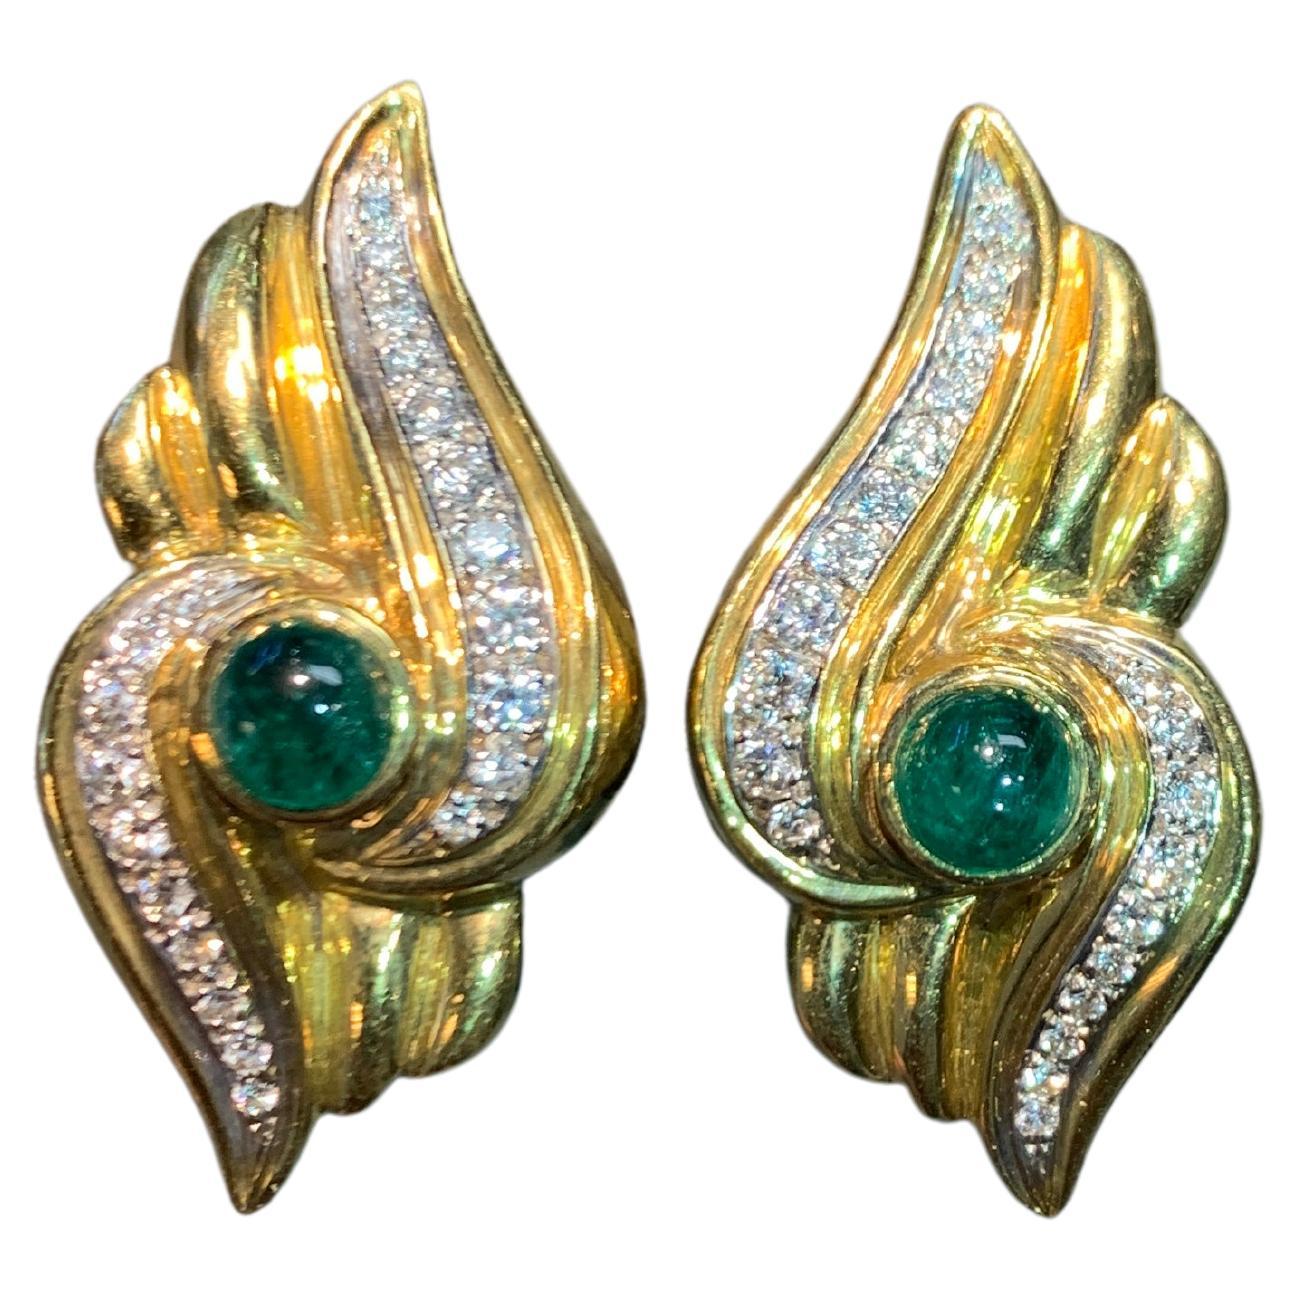 Emerald and Diamond Earrings 

A pair of 18 karat yellow gold earrings set with 2 cabochon emeralds weighing approximately 1.83 carats and approximately 0.91 carats of round cut diamonds

Stamped 750

Measurements: 1.25